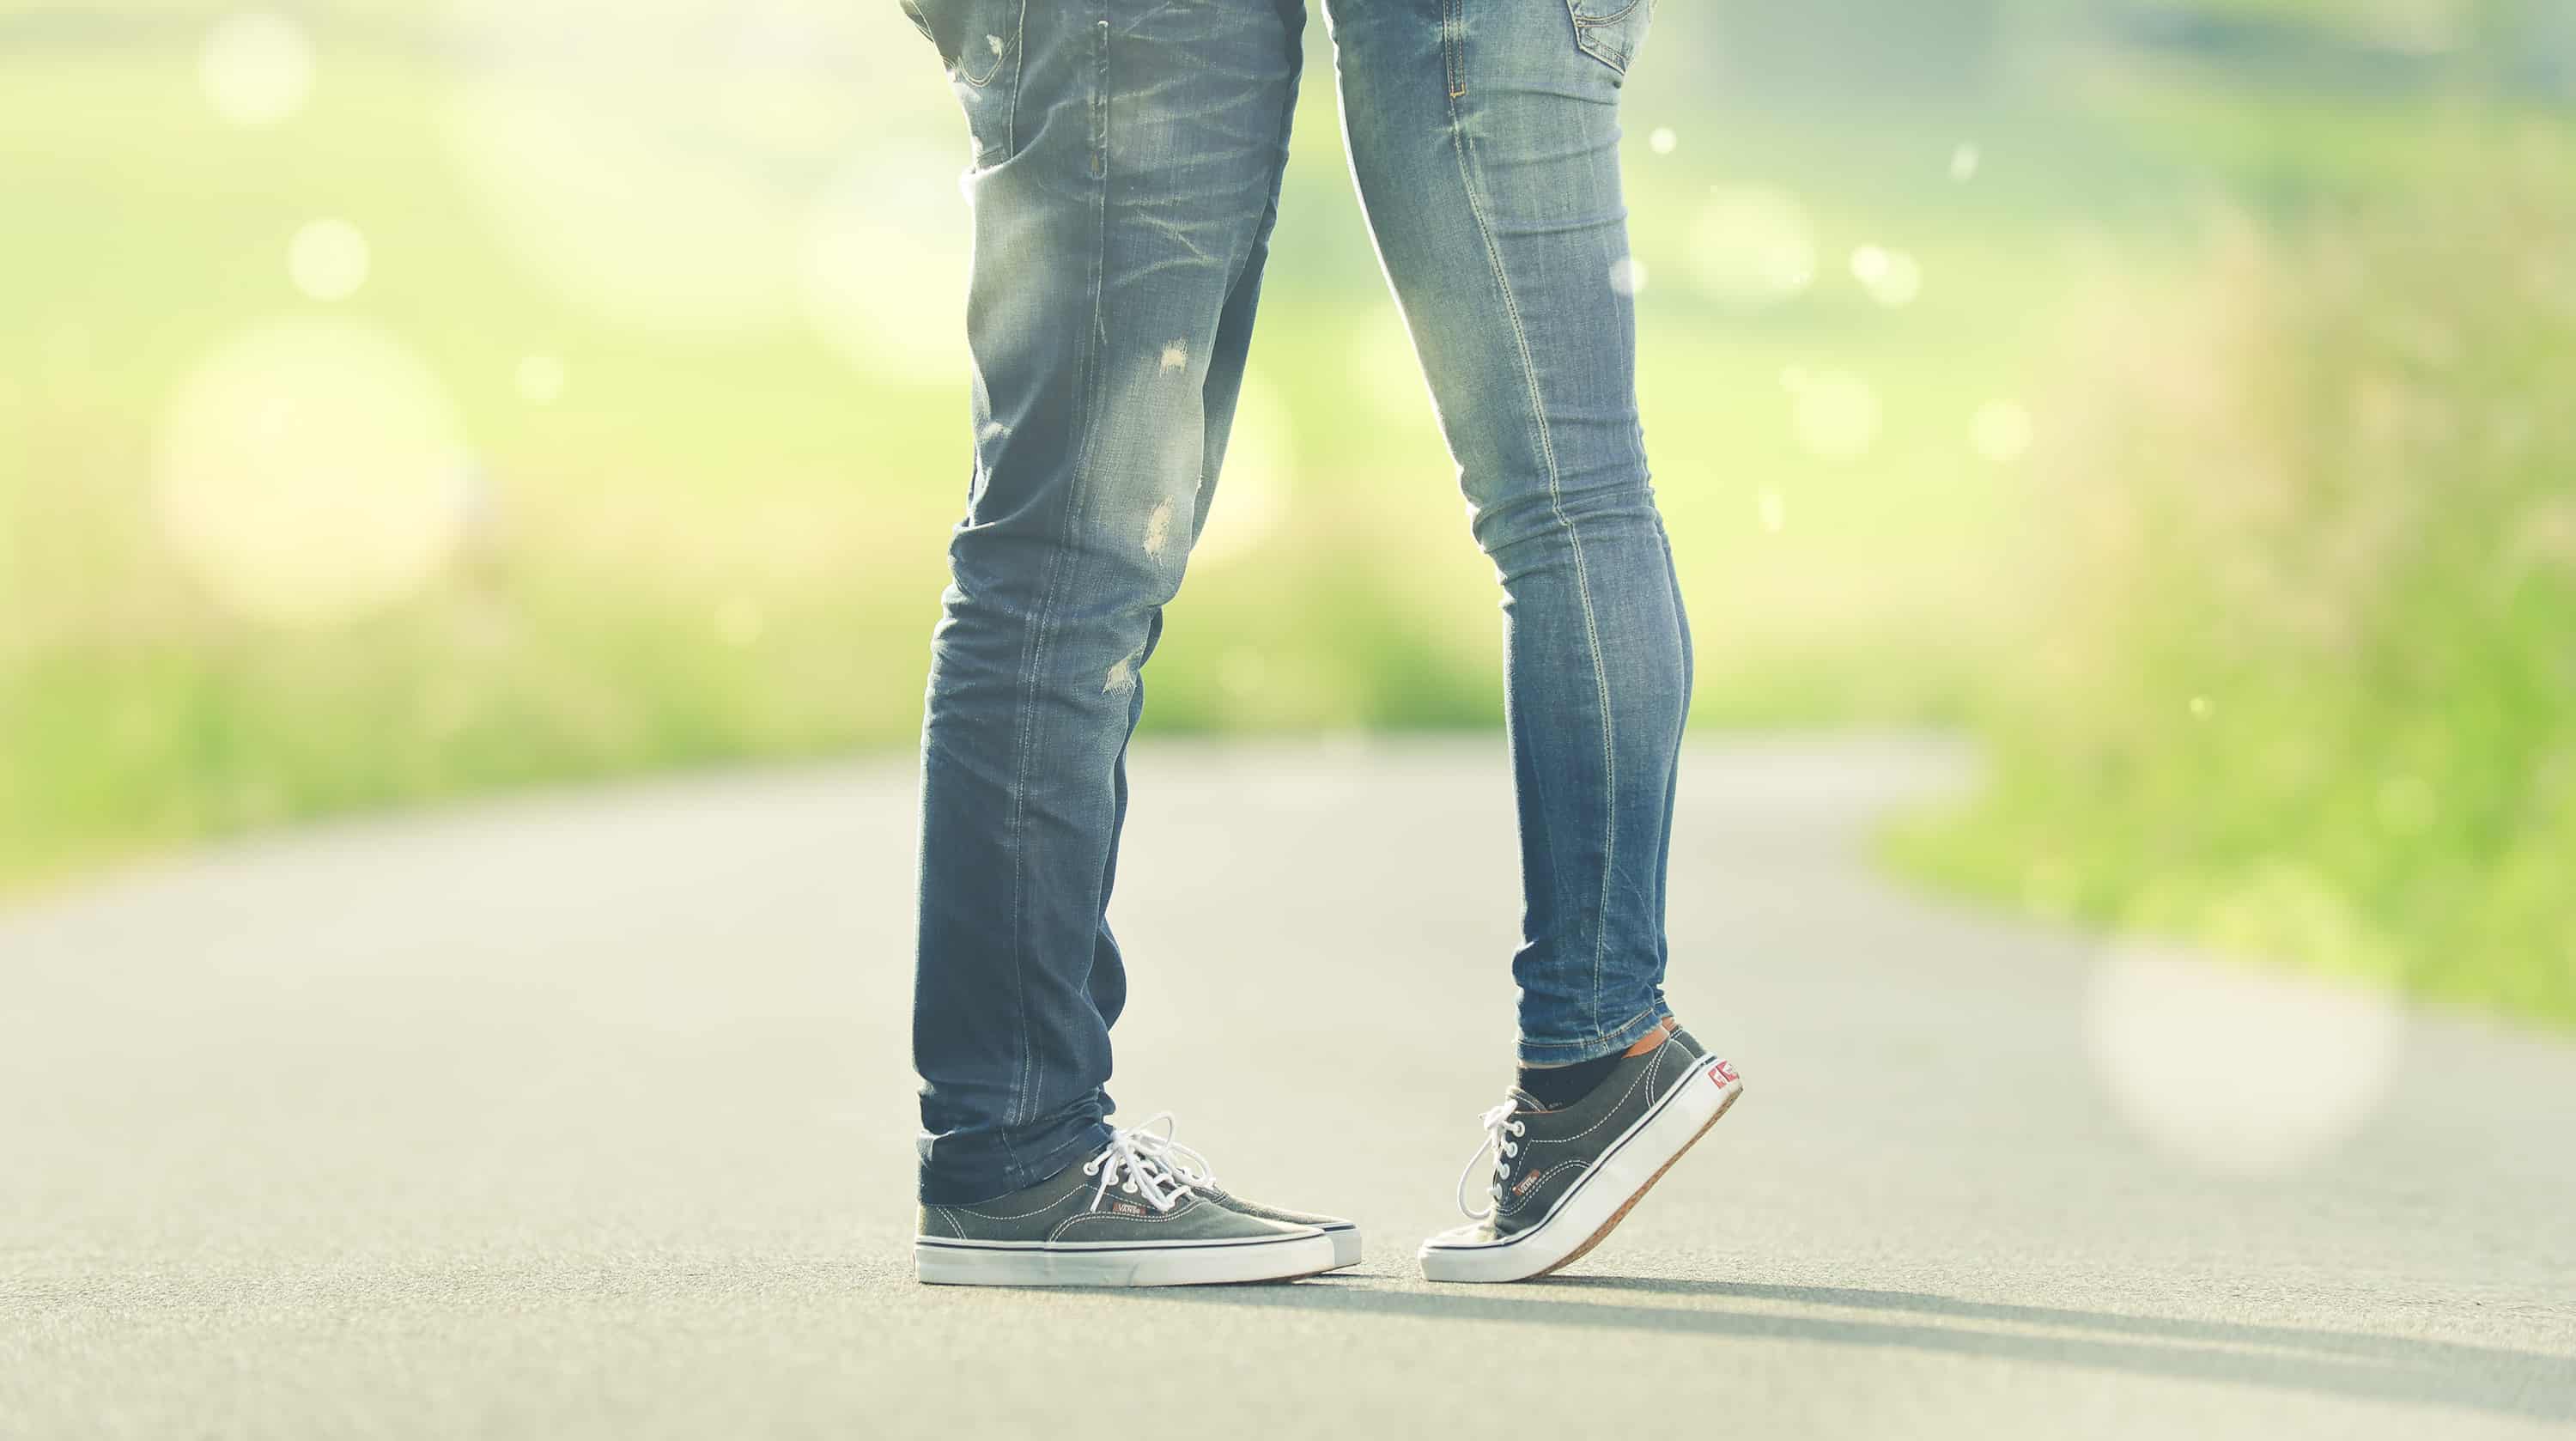 A woman and a man wearing jeans stand facing each other.